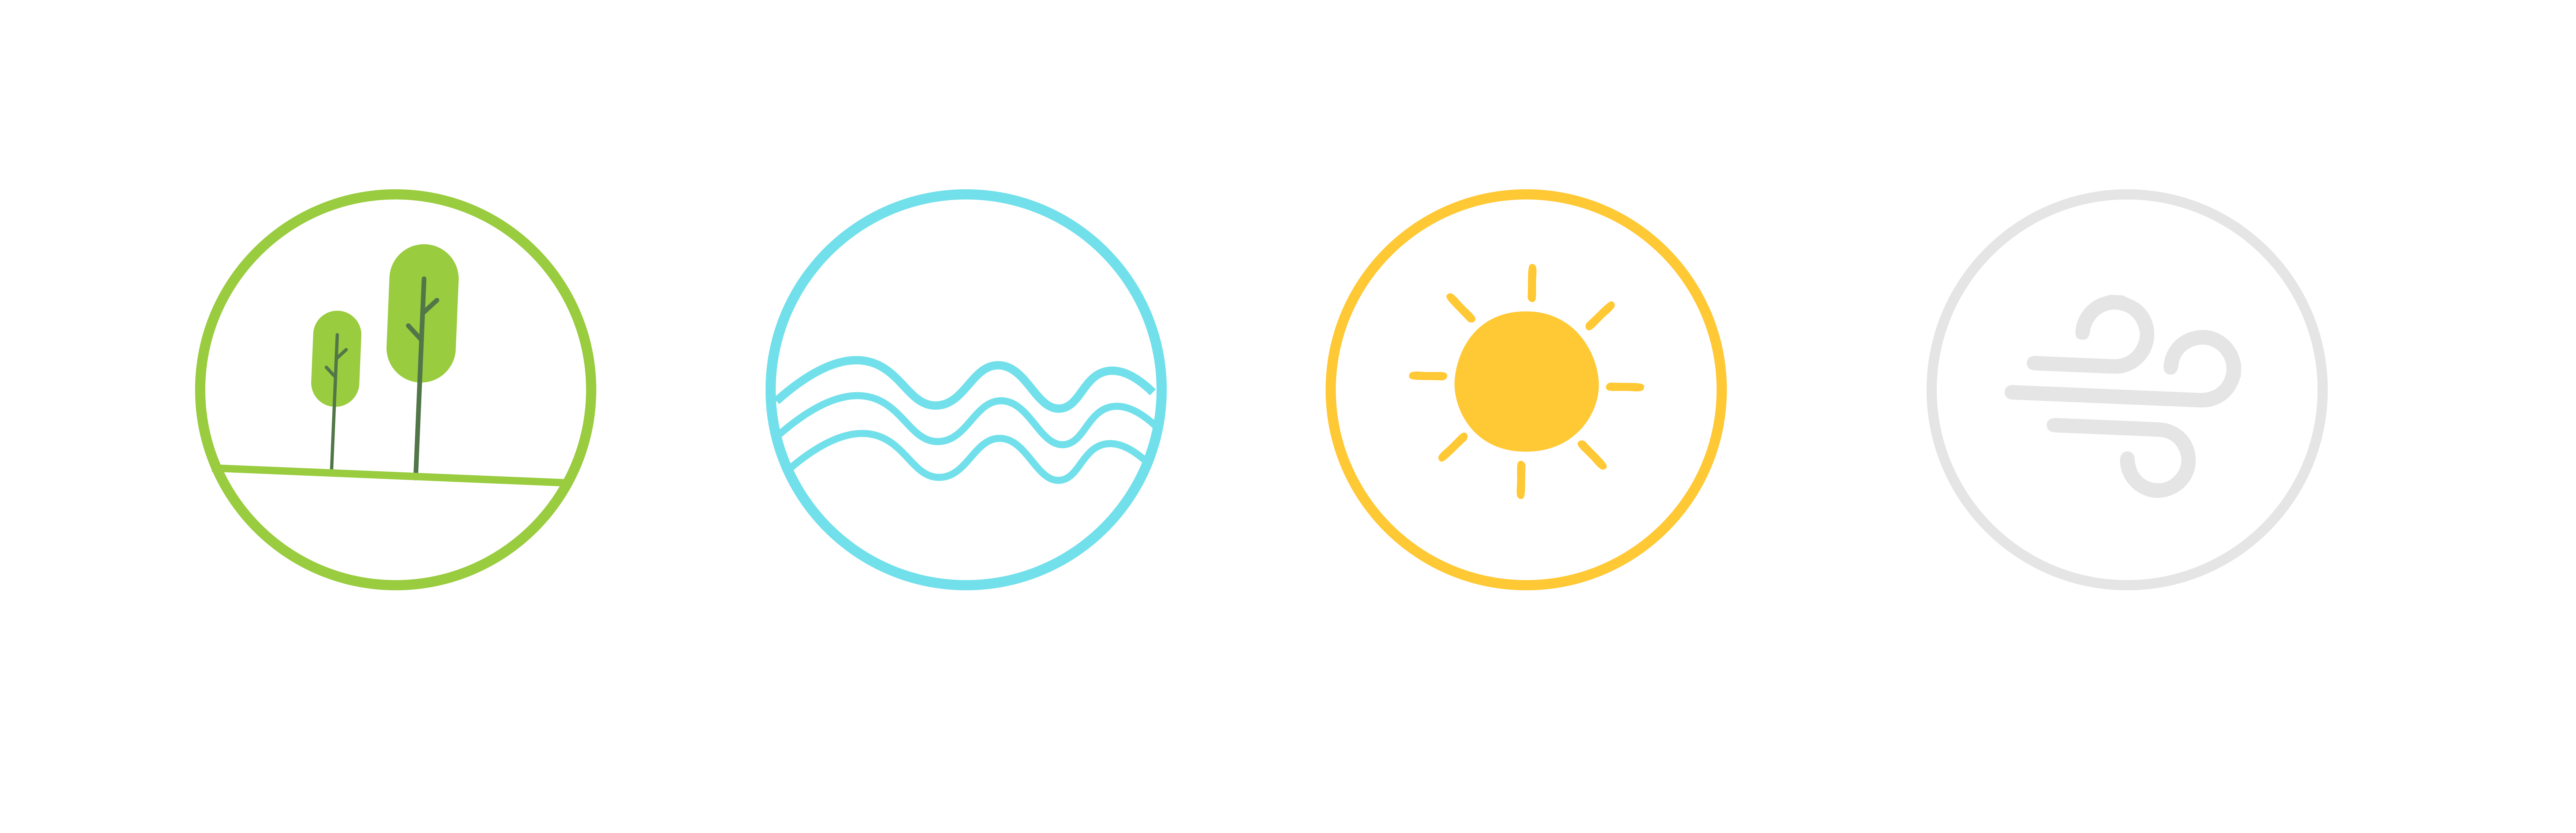 Icons depicting natural elements